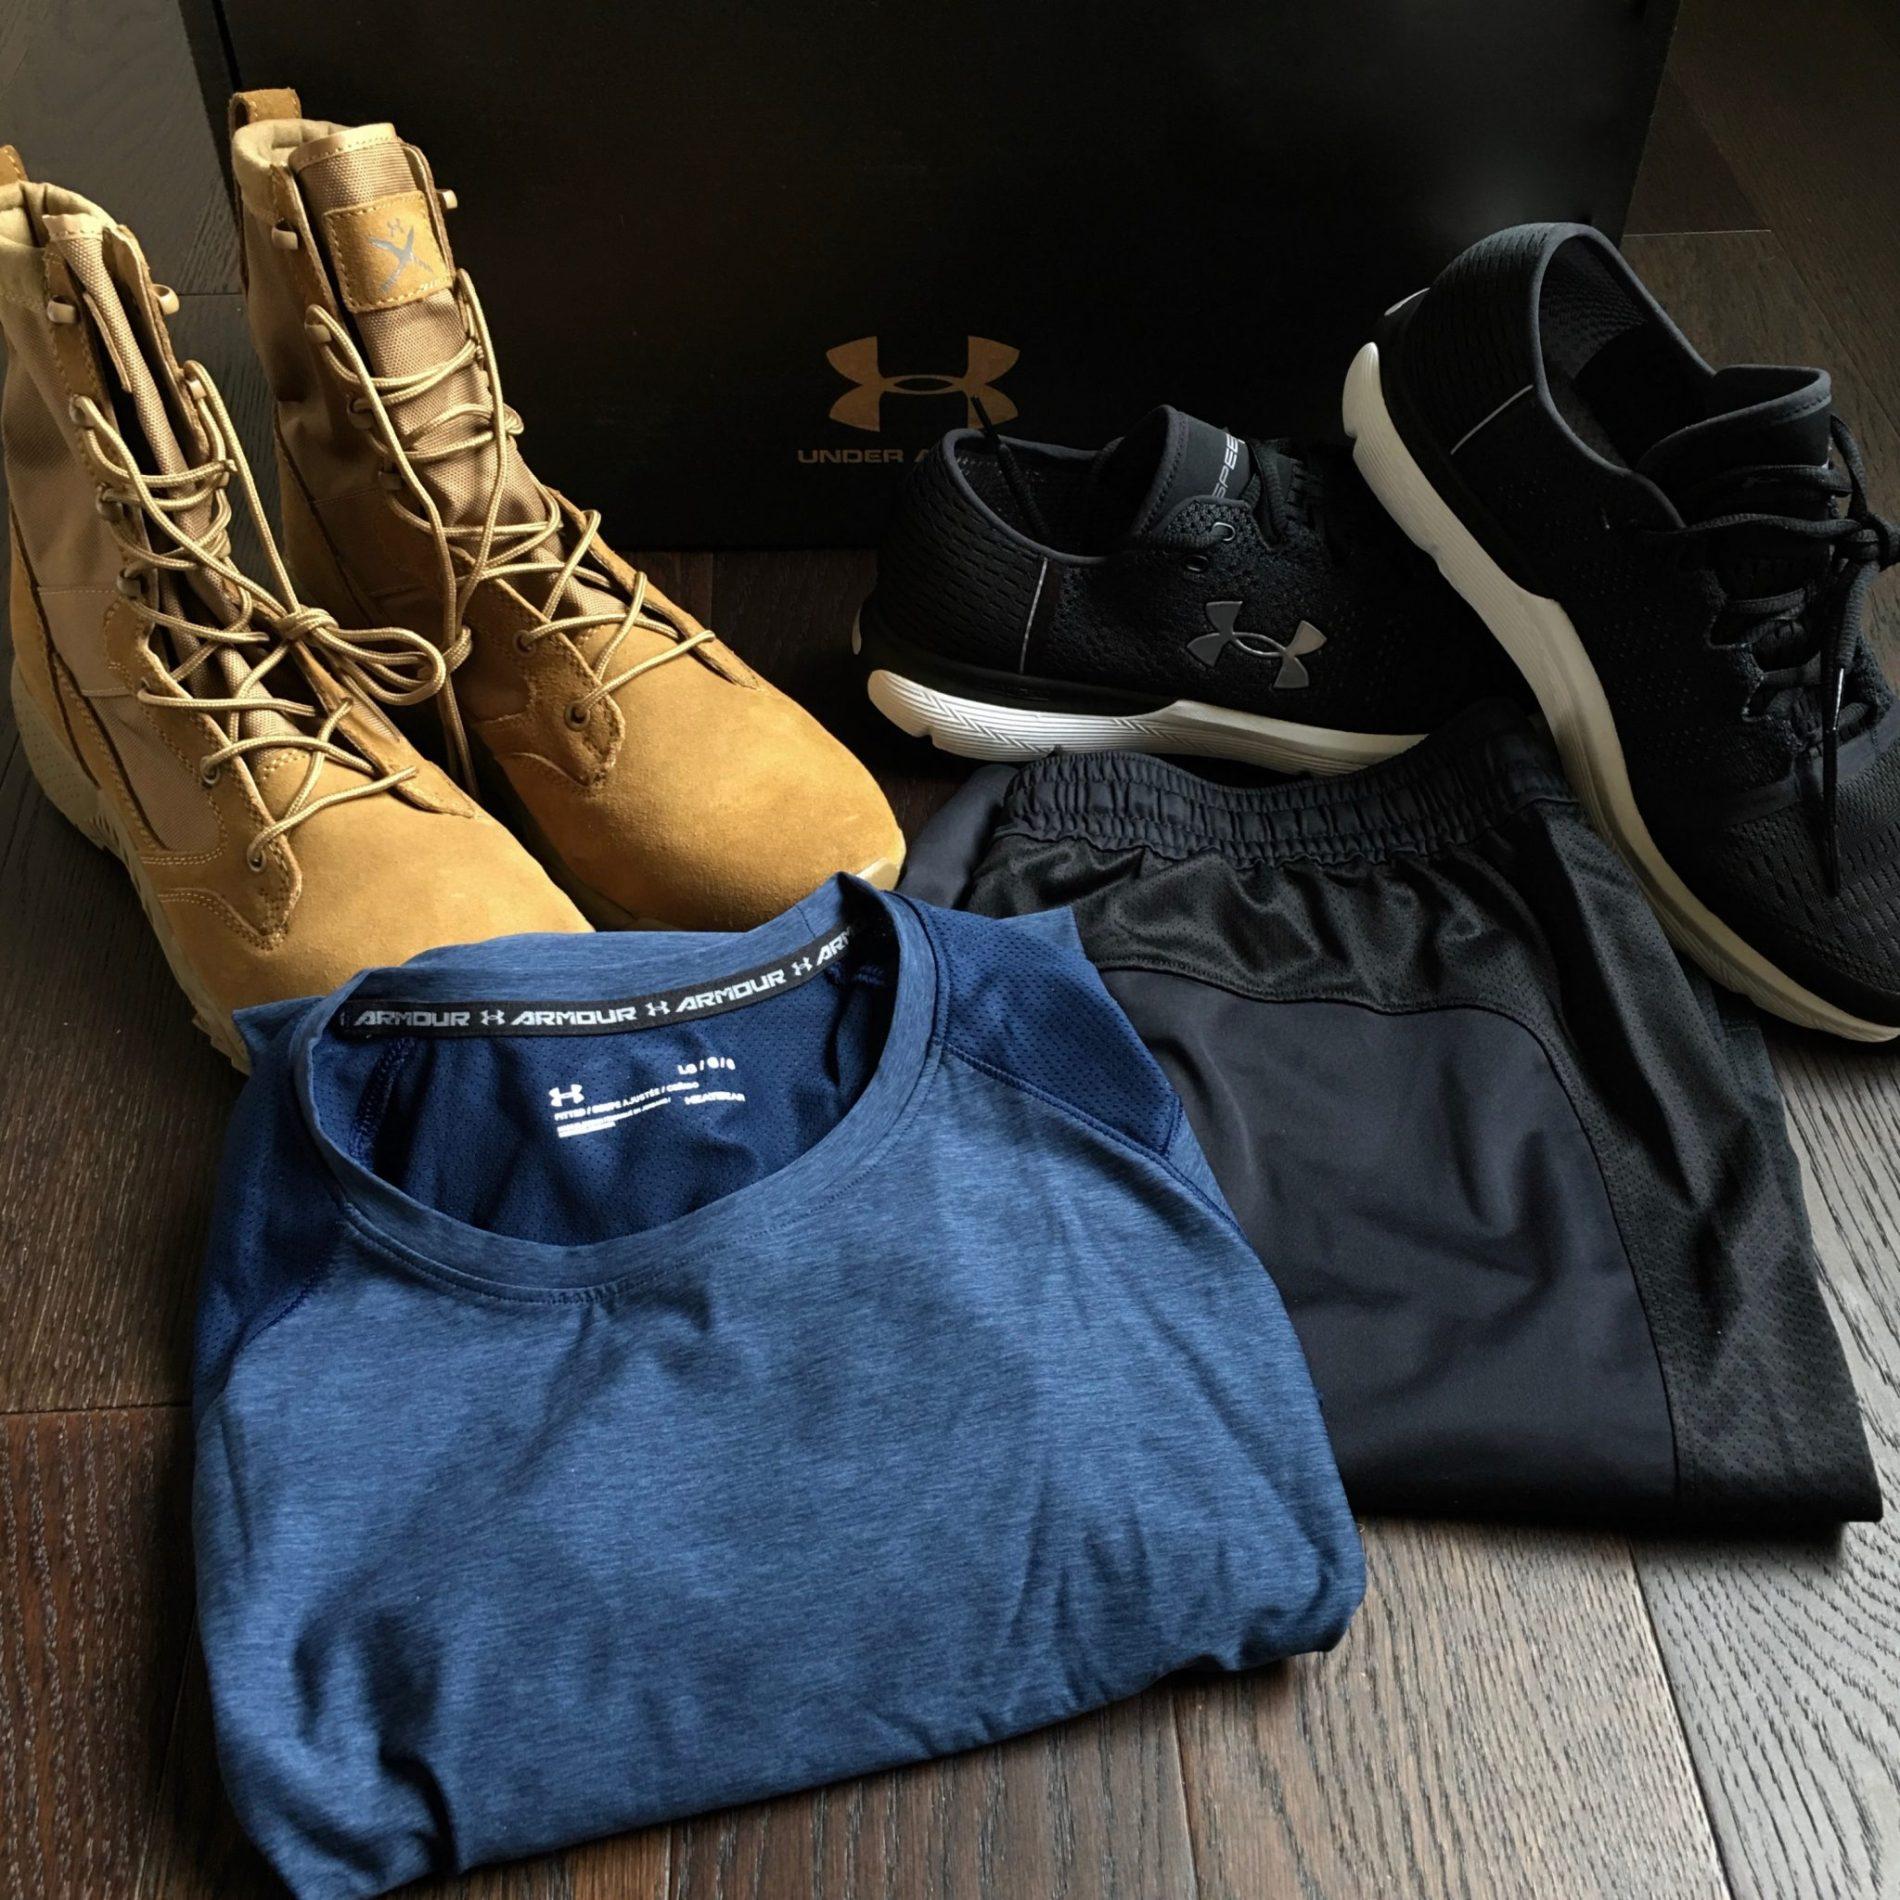 Read more about the article Under Armour Men’s ArmourBox Review – June 2018